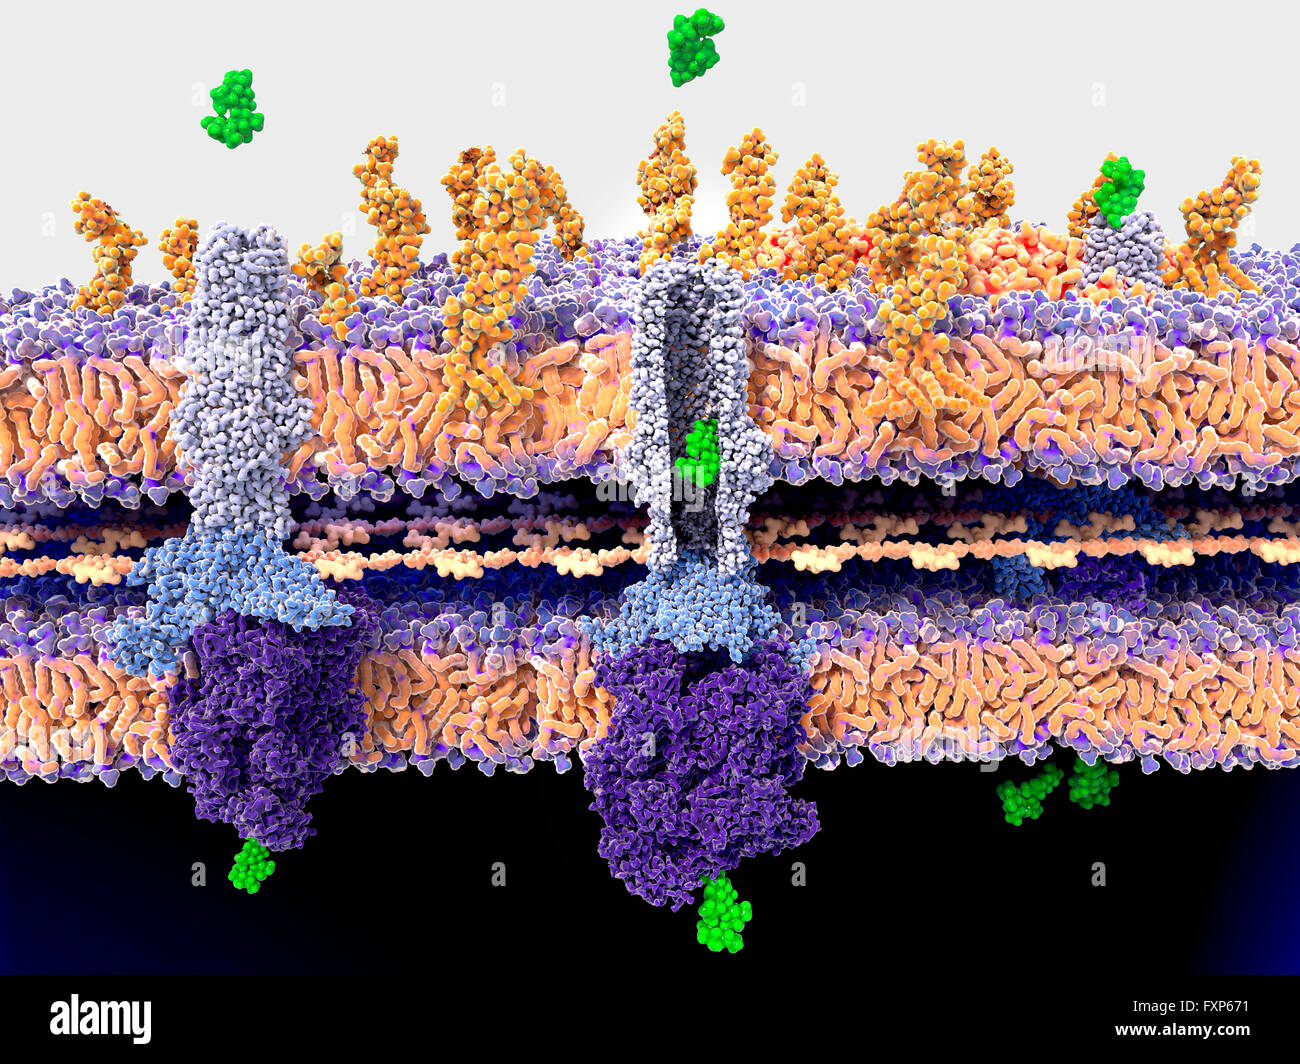 Bacterial wall and antibiotic resistance. Illustration of the molecular mechanism of antibiotic resistance. Here, the gram-negative bacterium has developed resistance and is expelling the antibiotic molecules (streptomycin, green) through a membrane protein pump. In this case the protein channel is the TolC efflux pump (purple-blue structure). Antibiotic resistance can occur over time through the overuse of antibiotic drugs. Resistant microbes require alternative drugs or higher doses of antibiotics. For an image showing the molecular mechanism of antibiotic resistance, see F013/1538. Stock Photo